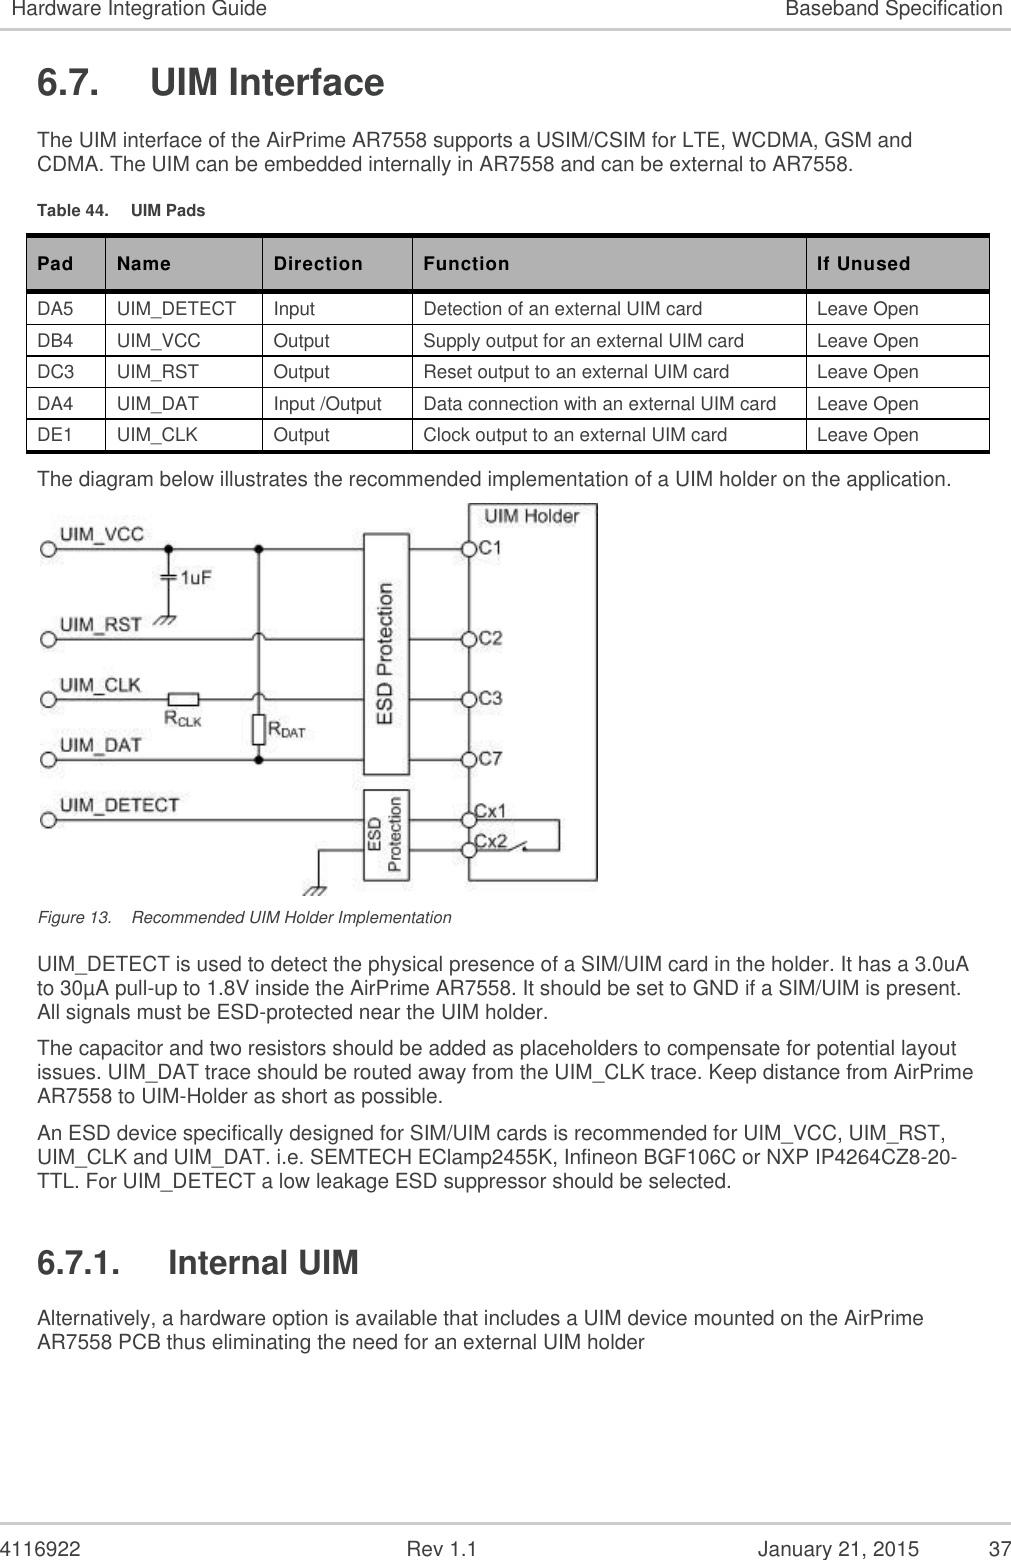   4116922              Rev 1.1          January 21, 2015  37 Hardware Integration Guide Baseband Specification 6.7.  UIM Interface The UIM interface of the AirPrime AR7558 supports a USIM/CSIM for LTE, WCDMA, GSM and CDMA. The UIM can be embedded internally in AR7558 and can be external to AR7558. Table 44.  UIM Pads Pad Name Direction Function If Unused DA5 UIM_DETECT Input Detection of an external UIM card Leave Open DB4 UIM_VCC Output Supply output for an external UIM card Leave Open DC3 UIM_RST Output Reset output to an external UIM card Leave Open DA4 UIM_DAT Input /Output Data connection with an external UIM card Leave Open DE1 UIM_CLK Output Clock output to an external UIM card Leave Open The diagram below illustrates the recommended implementation of a UIM holder on the application.  Figure 13.  Recommended UIM Holder Implementation UIM_DETECT is used to detect the physical presence of a SIM/UIM card in the holder. It has a 3.0uA to 30µA pull-up to 1.8V inside the AirPrime AR7558. It should be set to GND if a SIM/UIM is present.  All signals must be ESD-protected near the UIM holder. The capacitor and two resistors should be added as placeholders to compensate for potential layout issues. UIM_DAT trace should be routed away from the UIM_CLK trace. Keep distance from AirPrime AR7558 to UIM-Holder as short as possible. An ESD device specifically designed for SIM/UIM cards is recommended for UIM_VCC, UIM_RST, UIM_CLK and UIM_DAT. i.e. SEMTECH EClamp2455K, Infineon BGF106C or NXP IP4264CZ8-20-TTL. For UIM_DETECT a low leakage ESD suppressor should be selected. 6.7.1.  Internal UIM Alternatively, a hardware option is available that includes a UIM device mounted on the AirPrime AR7558 PCB thus eliminating the need for an external UIM holder   